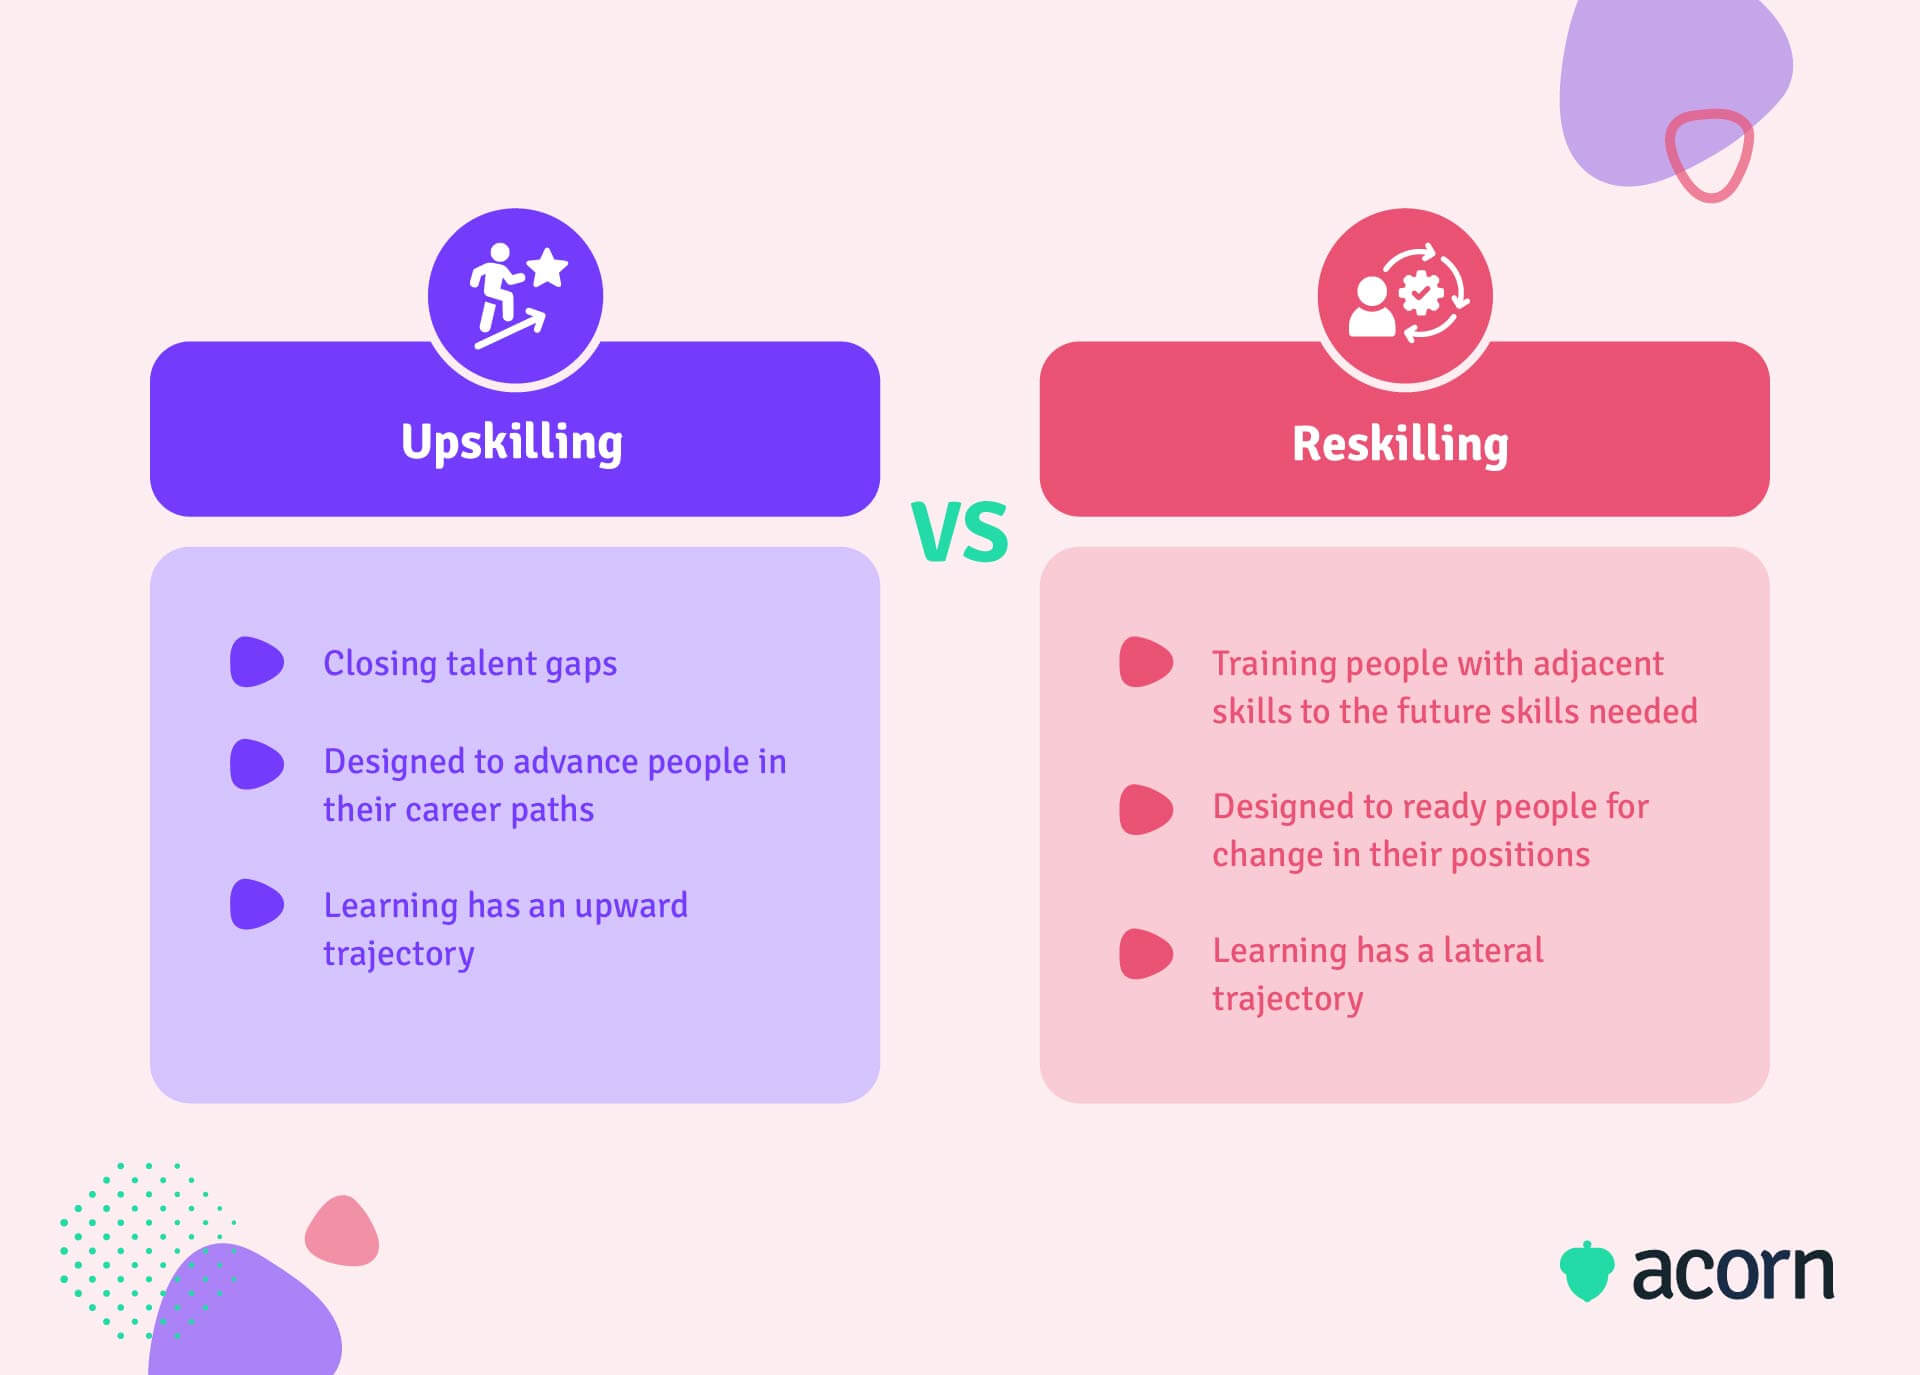 Infographic contrasting the business impact, design, and outcomes of upskilling and reskilling